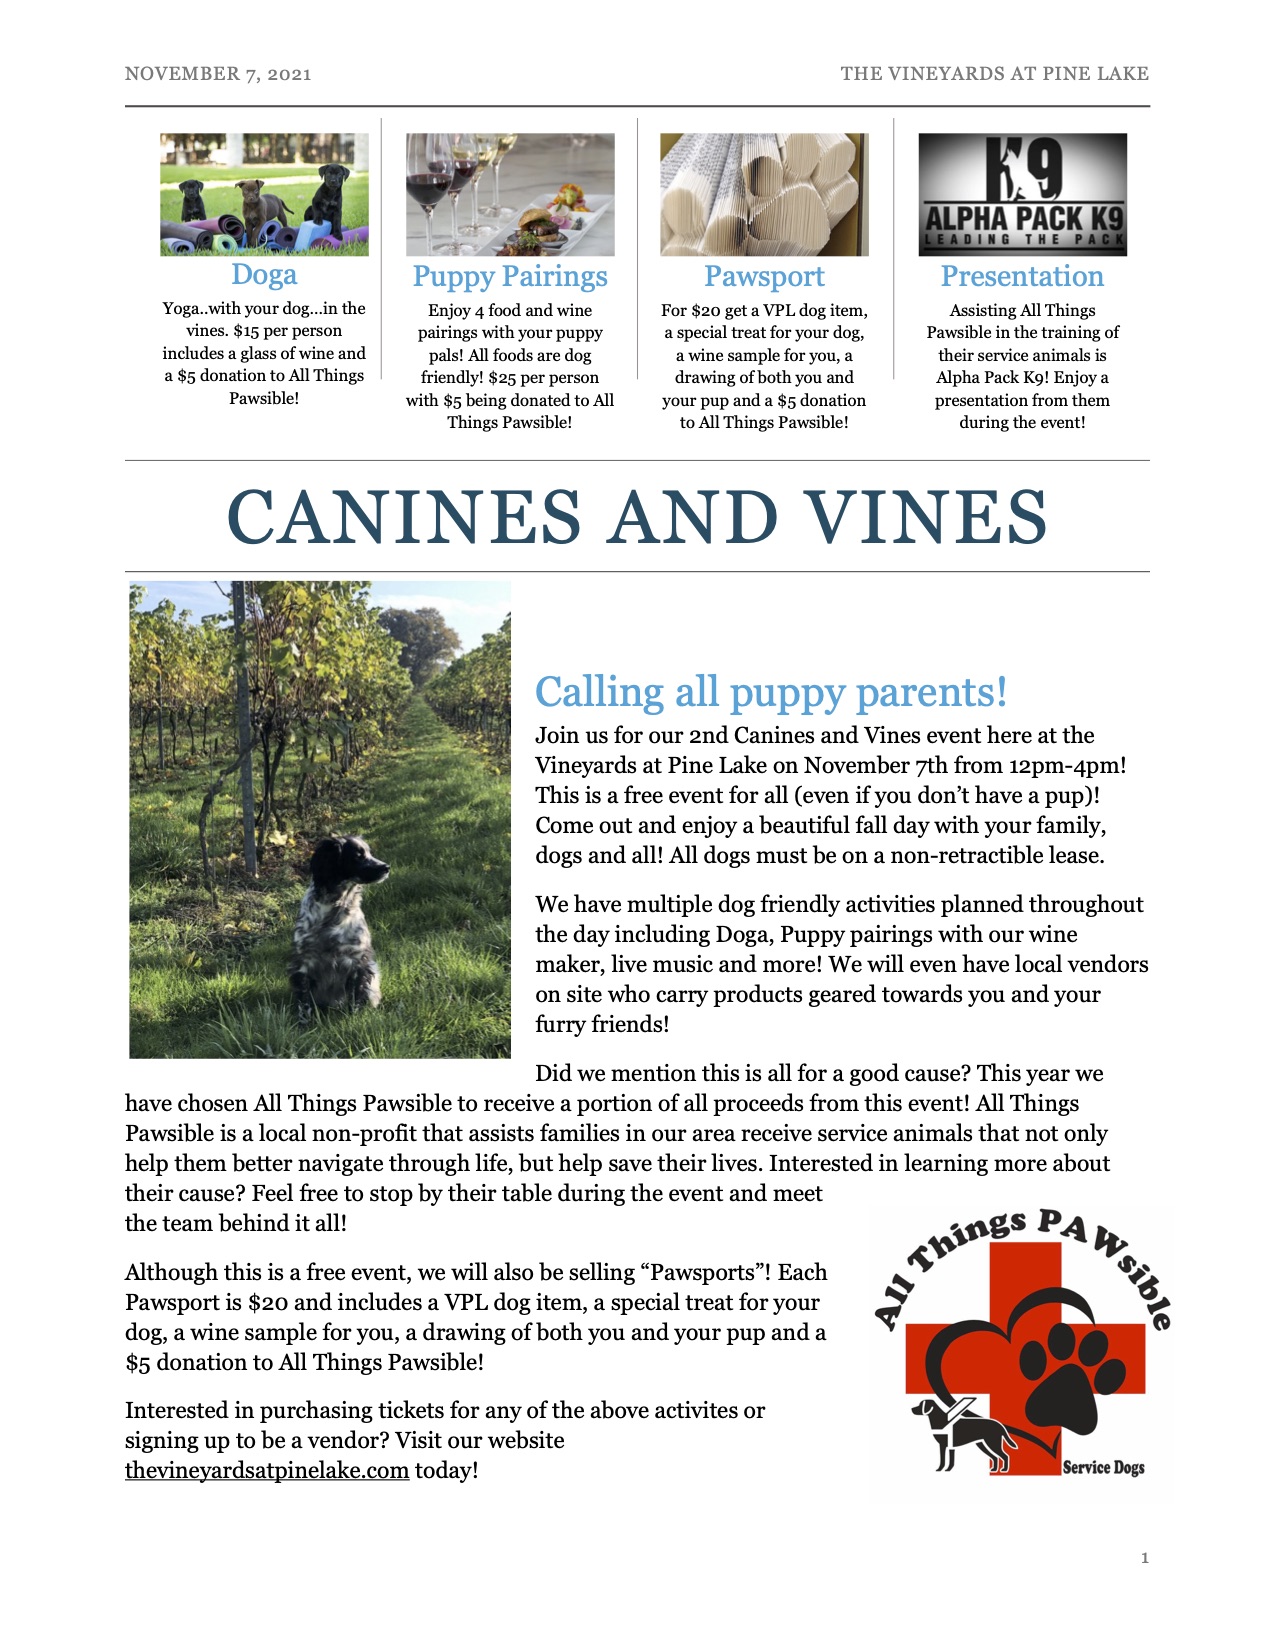 Canines and Vines